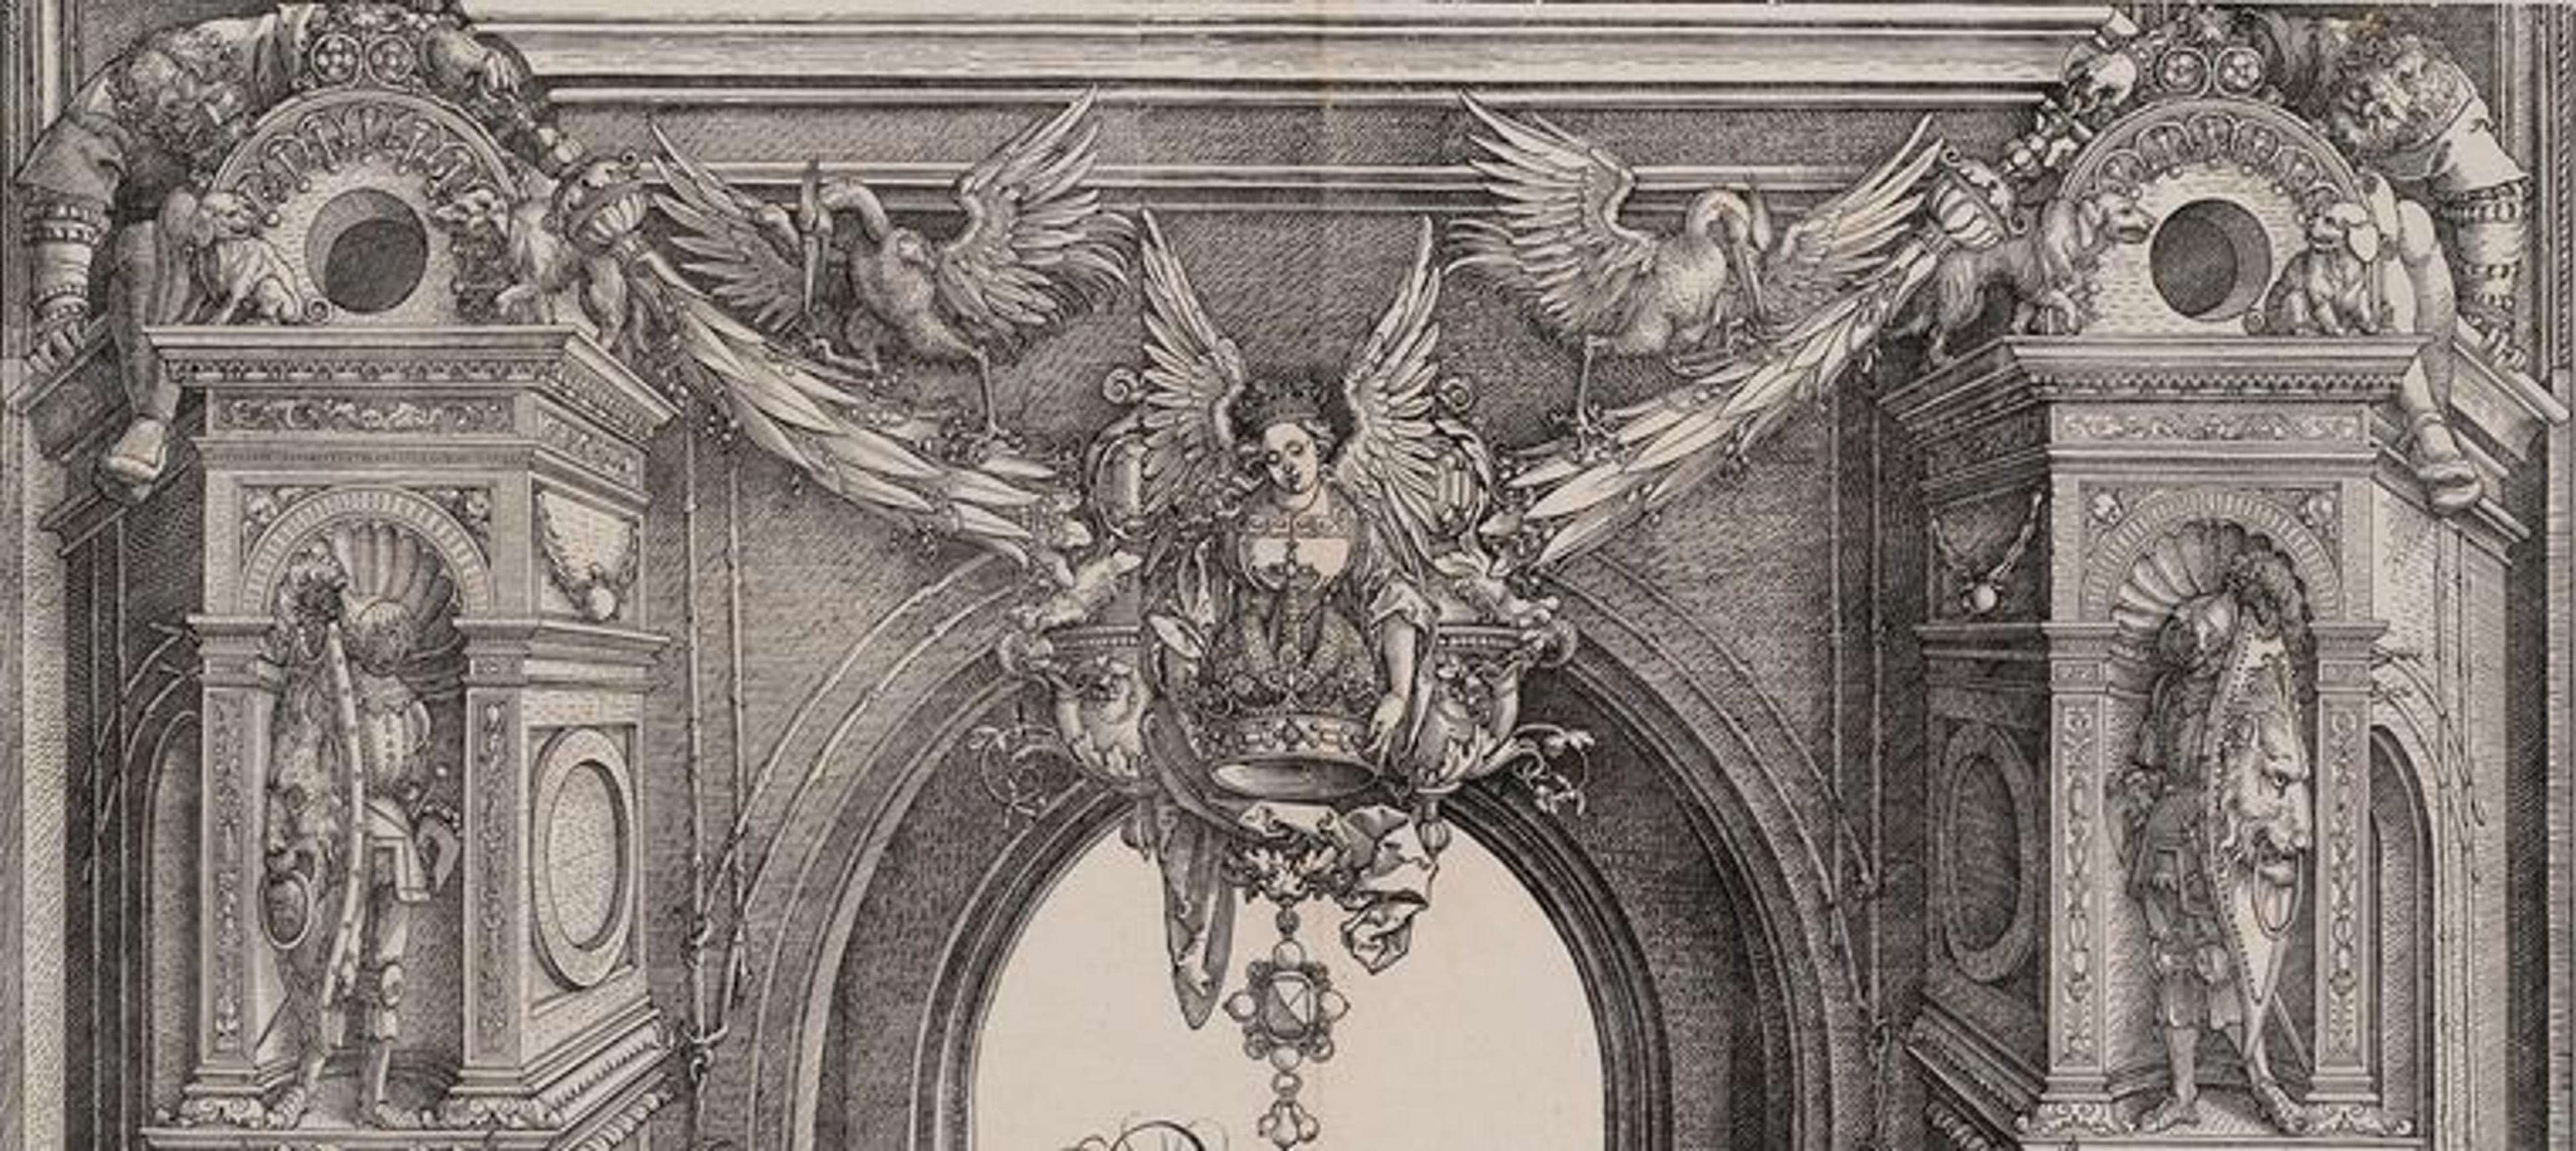 Detail from the Arch of Honor showing an angel flying through the arch, with winged swans and figures standing in niches on both sides